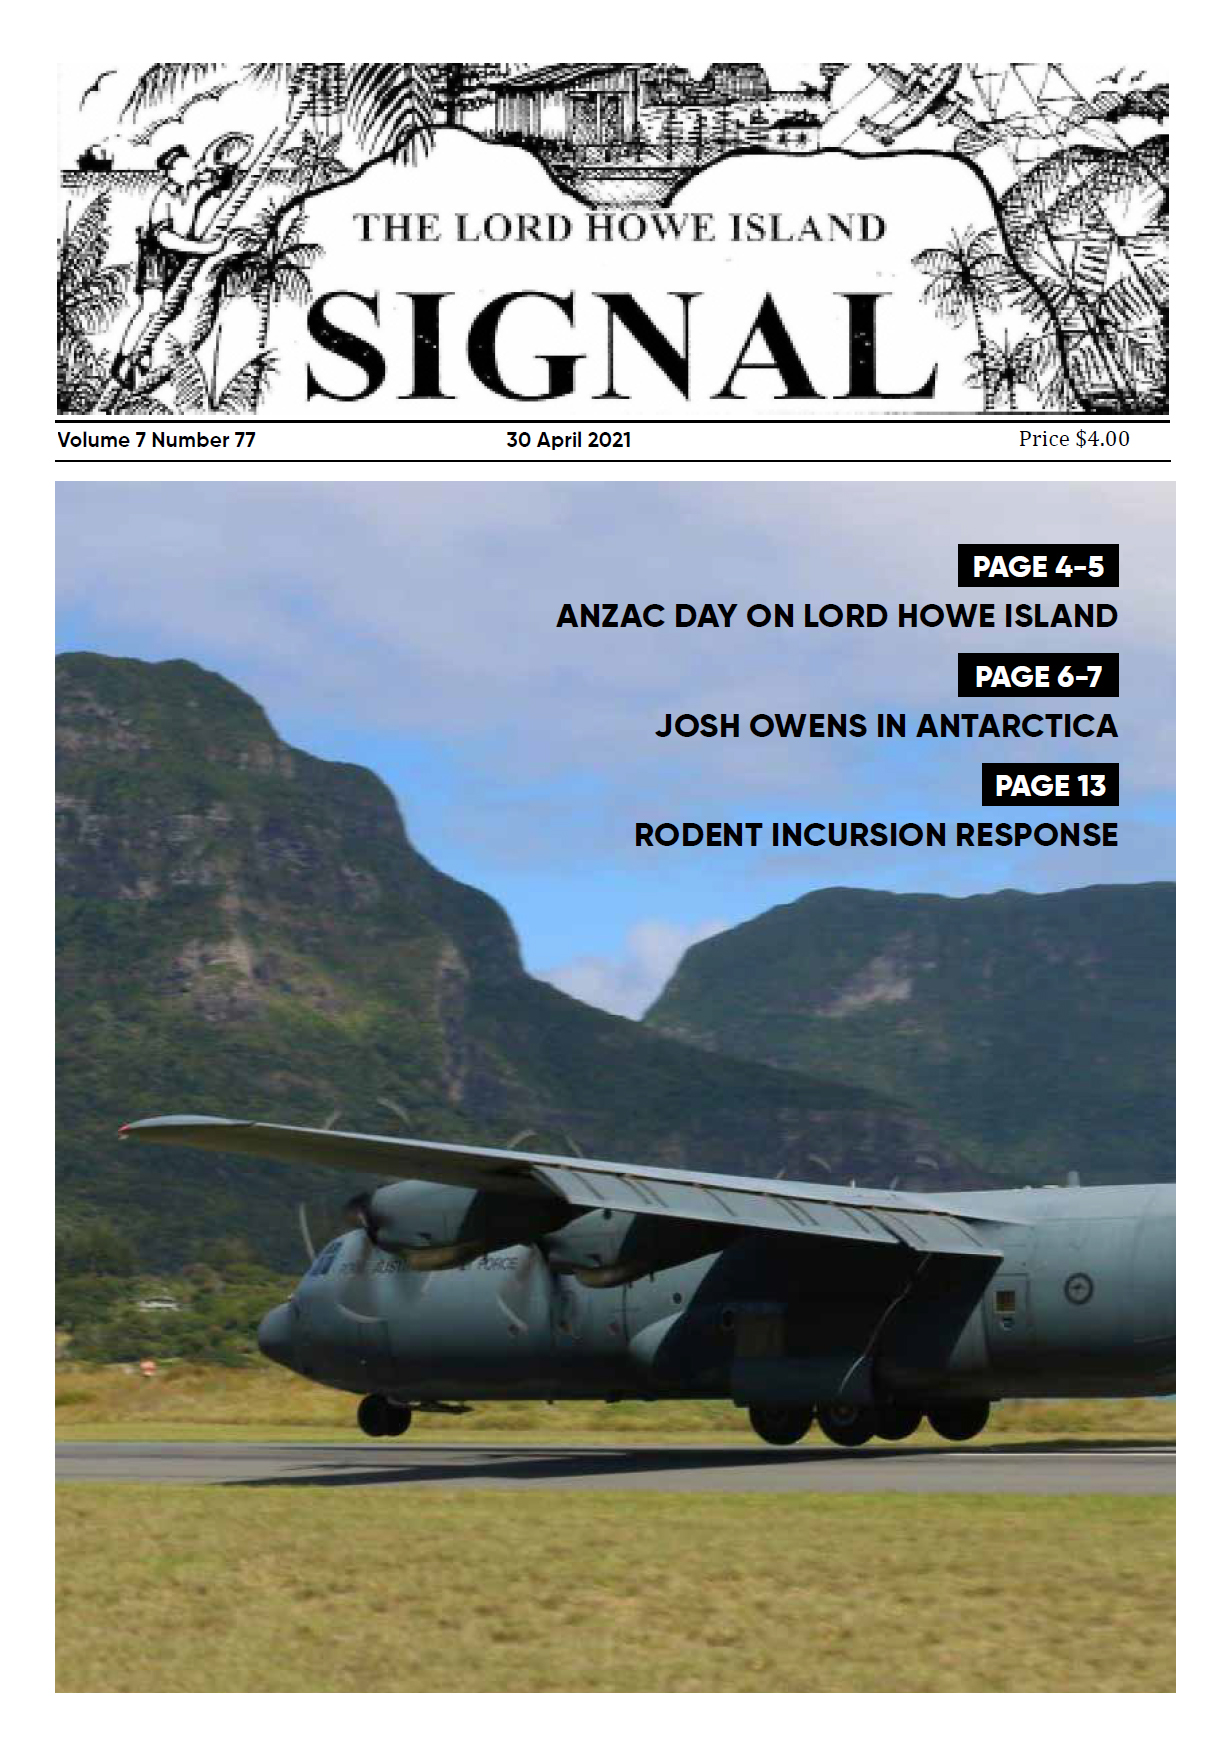 The Lord Howe Island Signal 30 April 2021